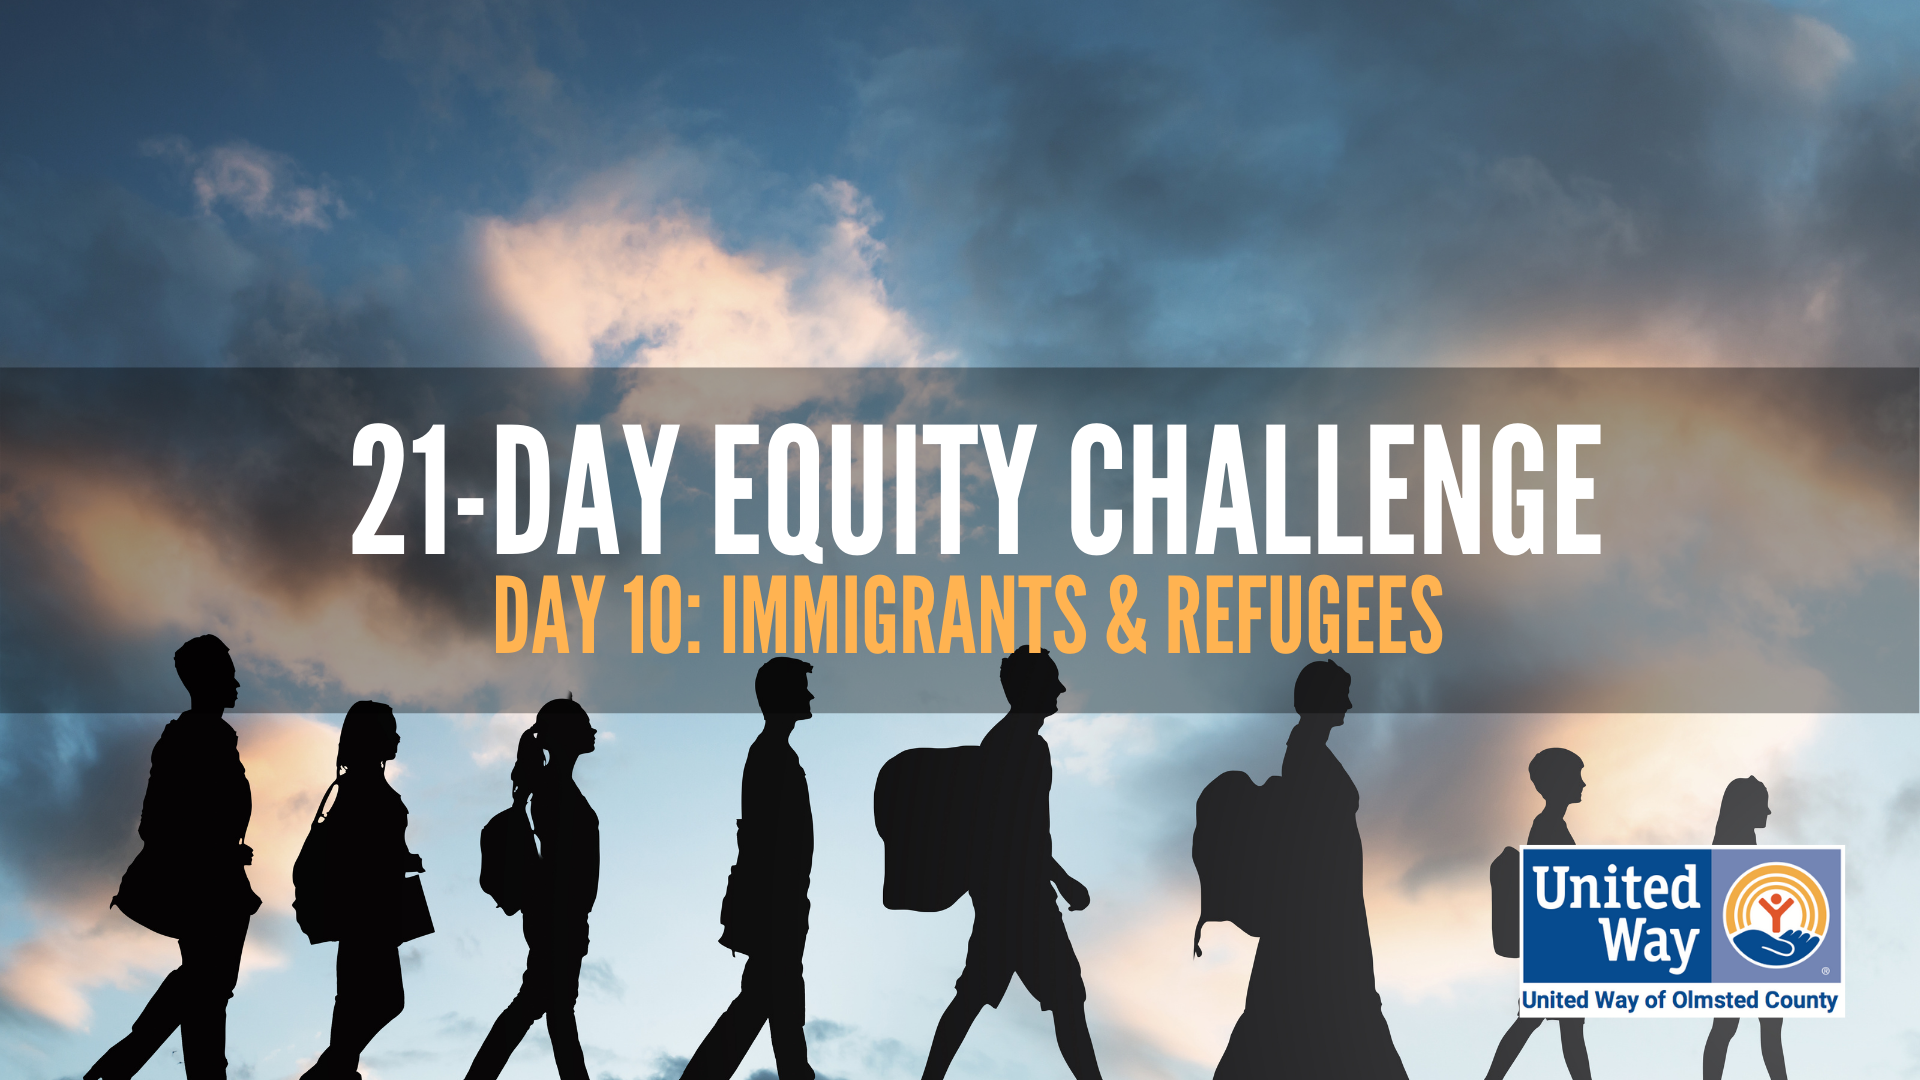 Day 10: Immigrants & Refugees